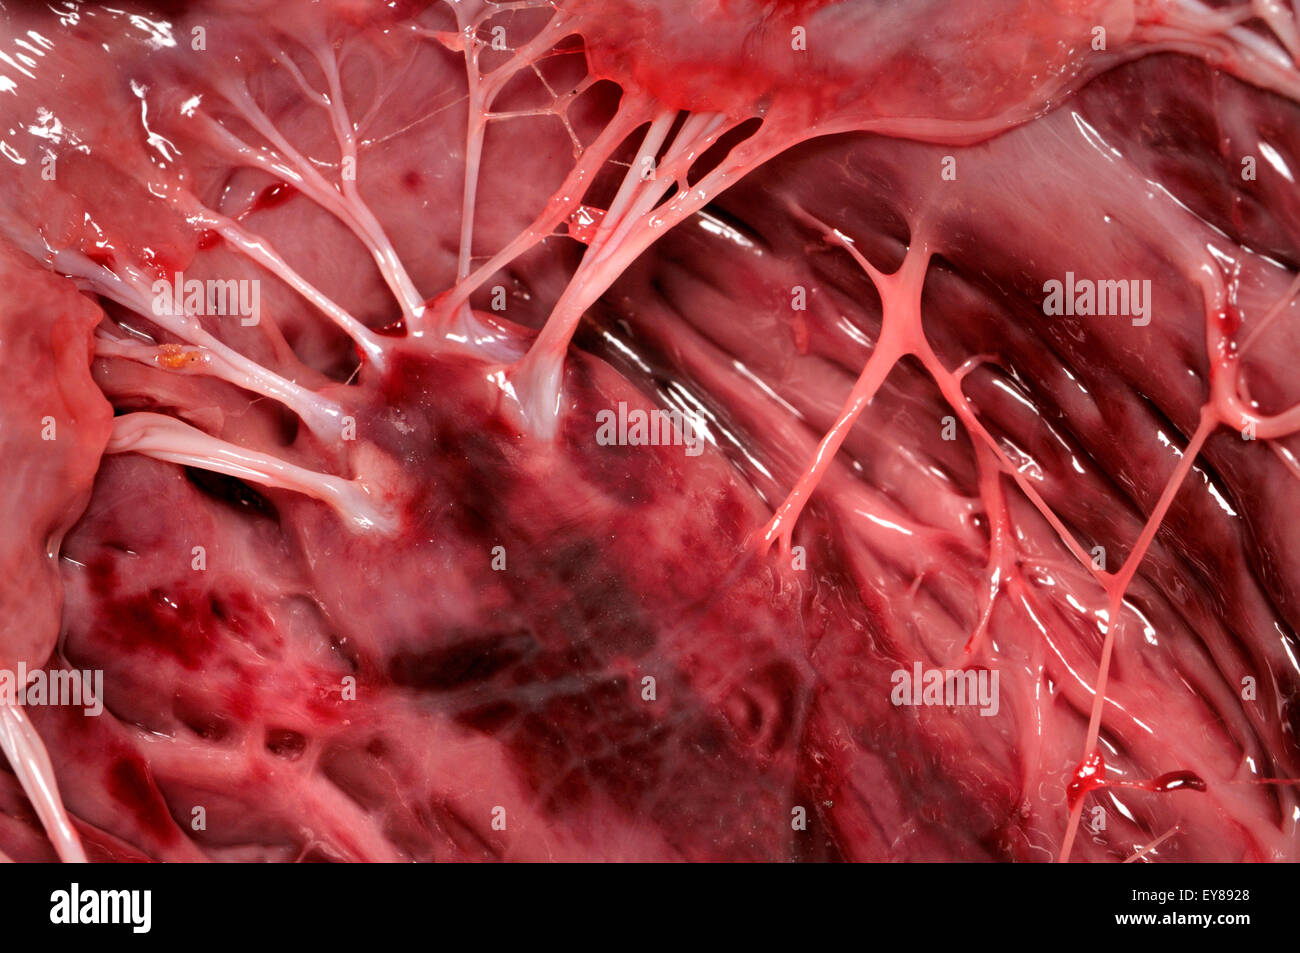 Lamb's heart bought from a supermarket. Interior showing 'heartstrings' (tendons) Stock Photo